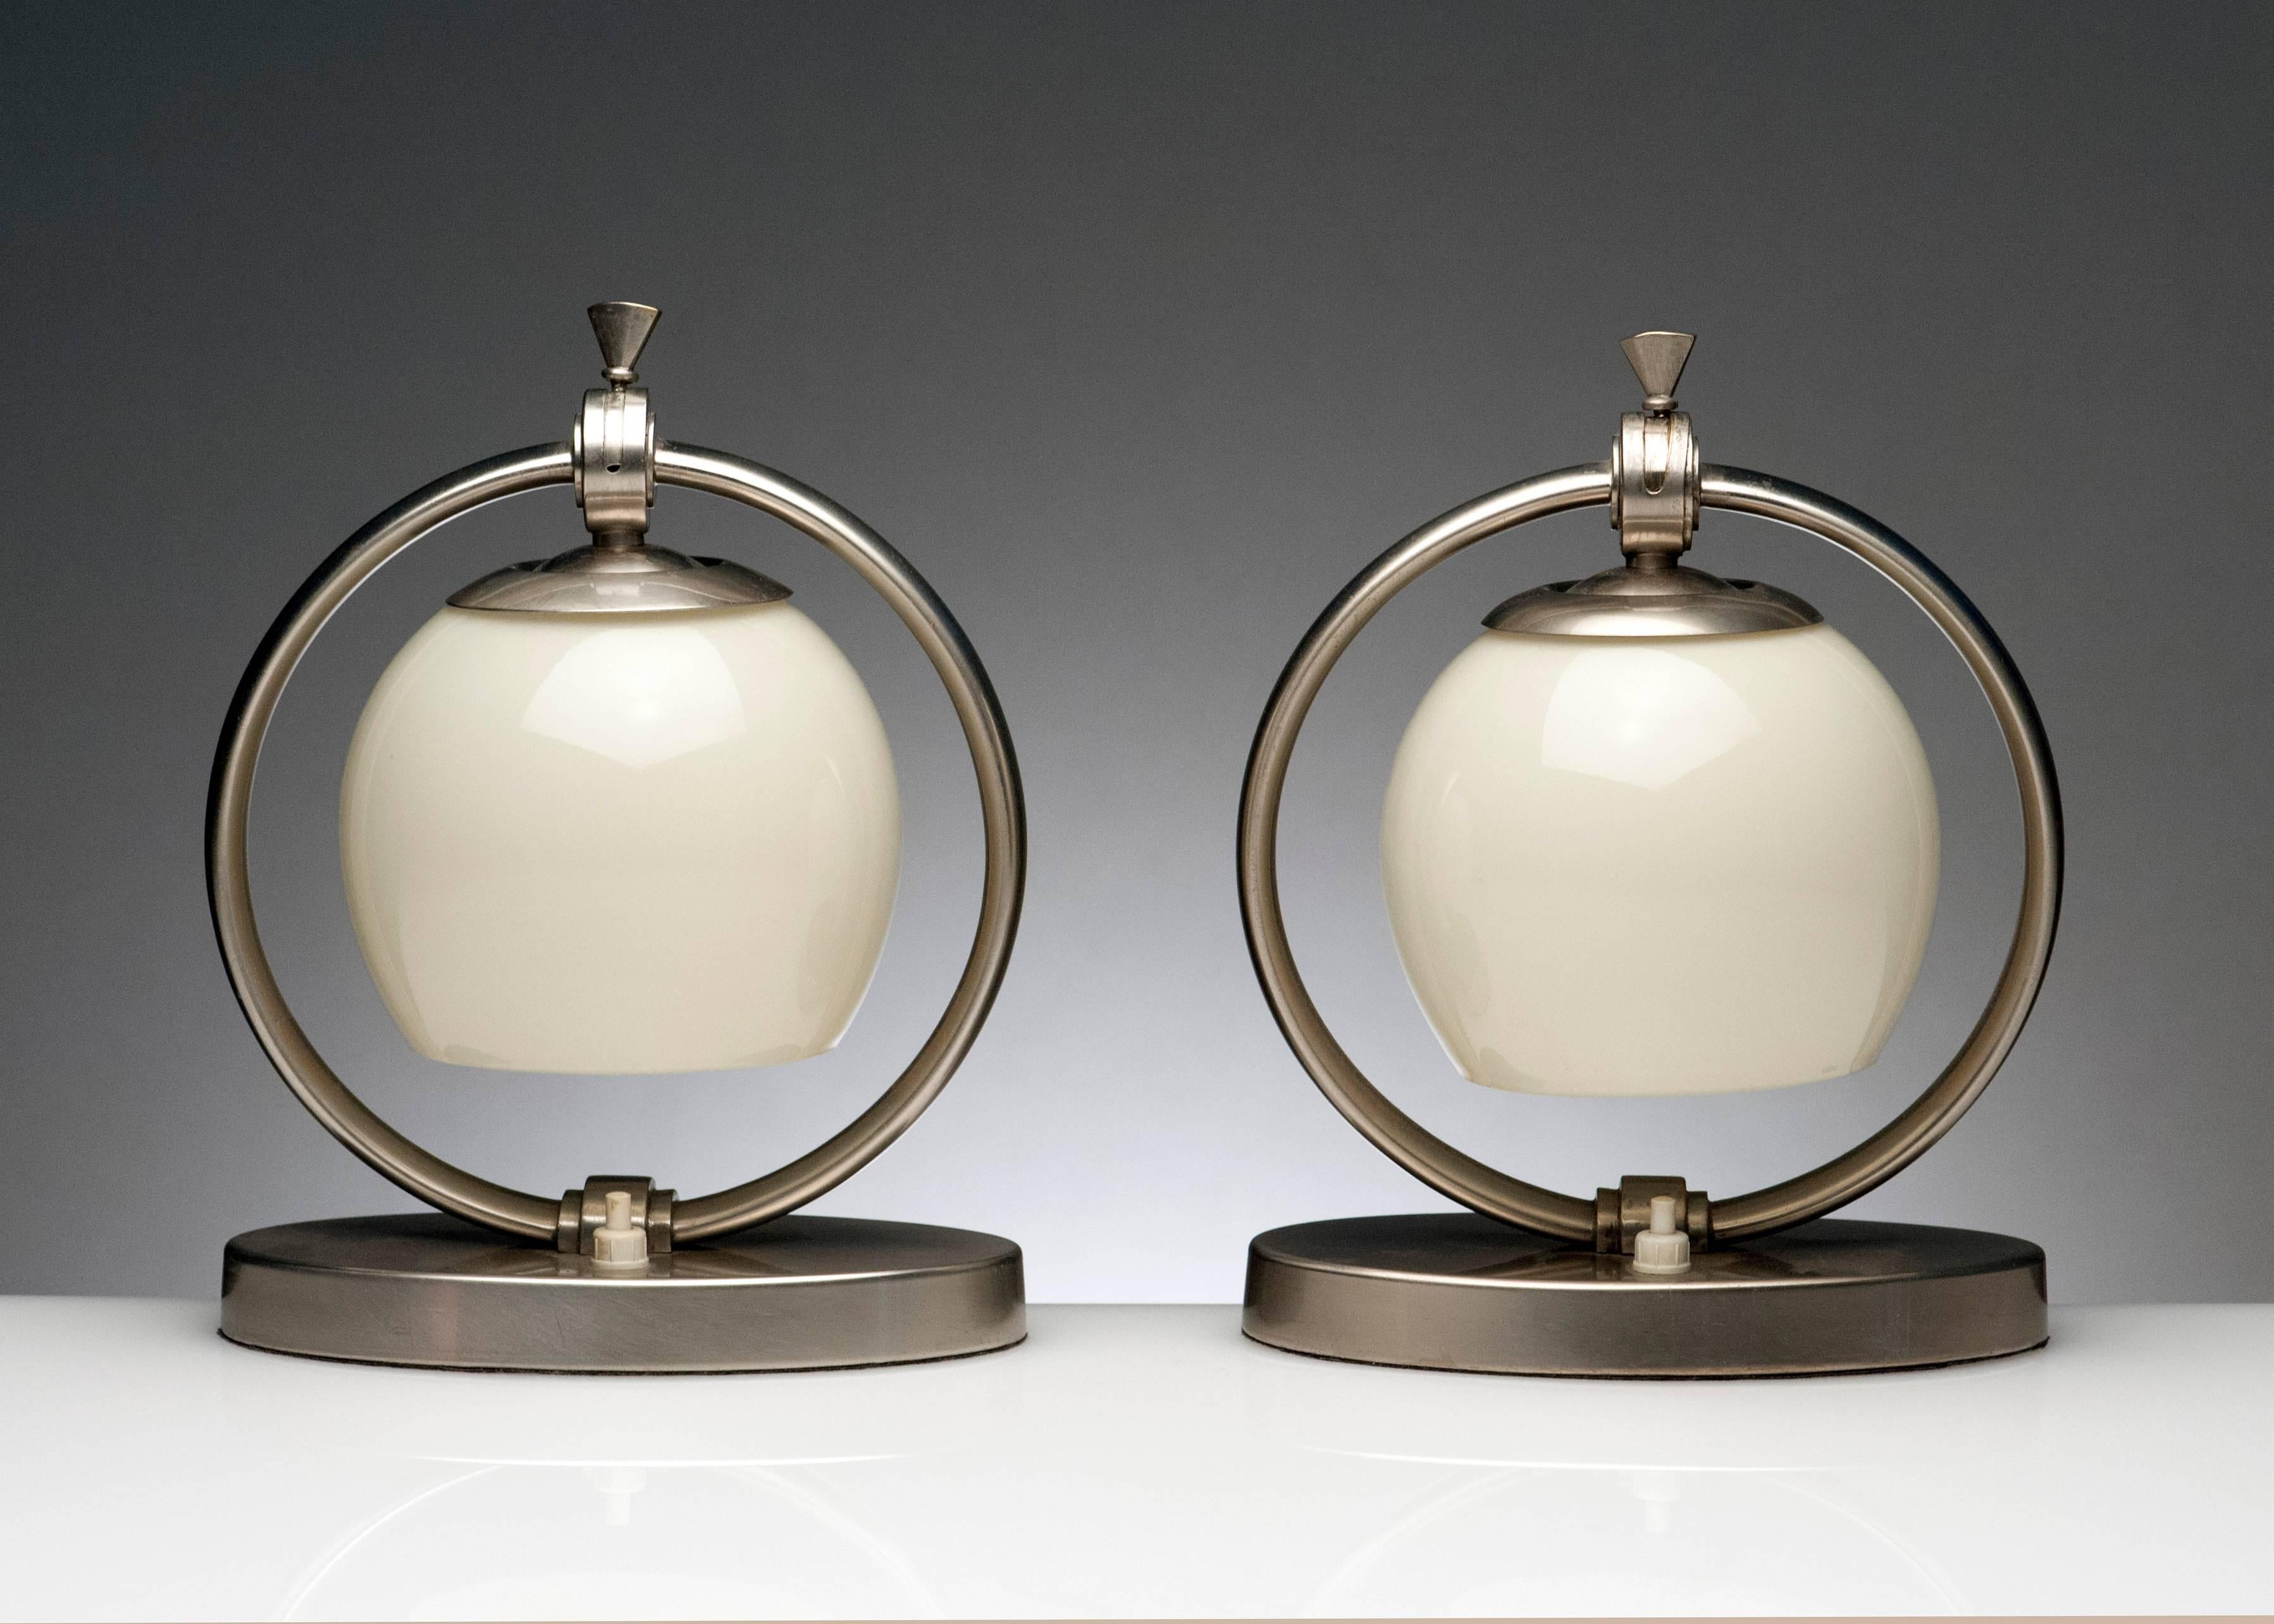 Rare pair of desk lamps by WMF of Germany. Lamps are exceptionally made and retain their original handblown glass shades.